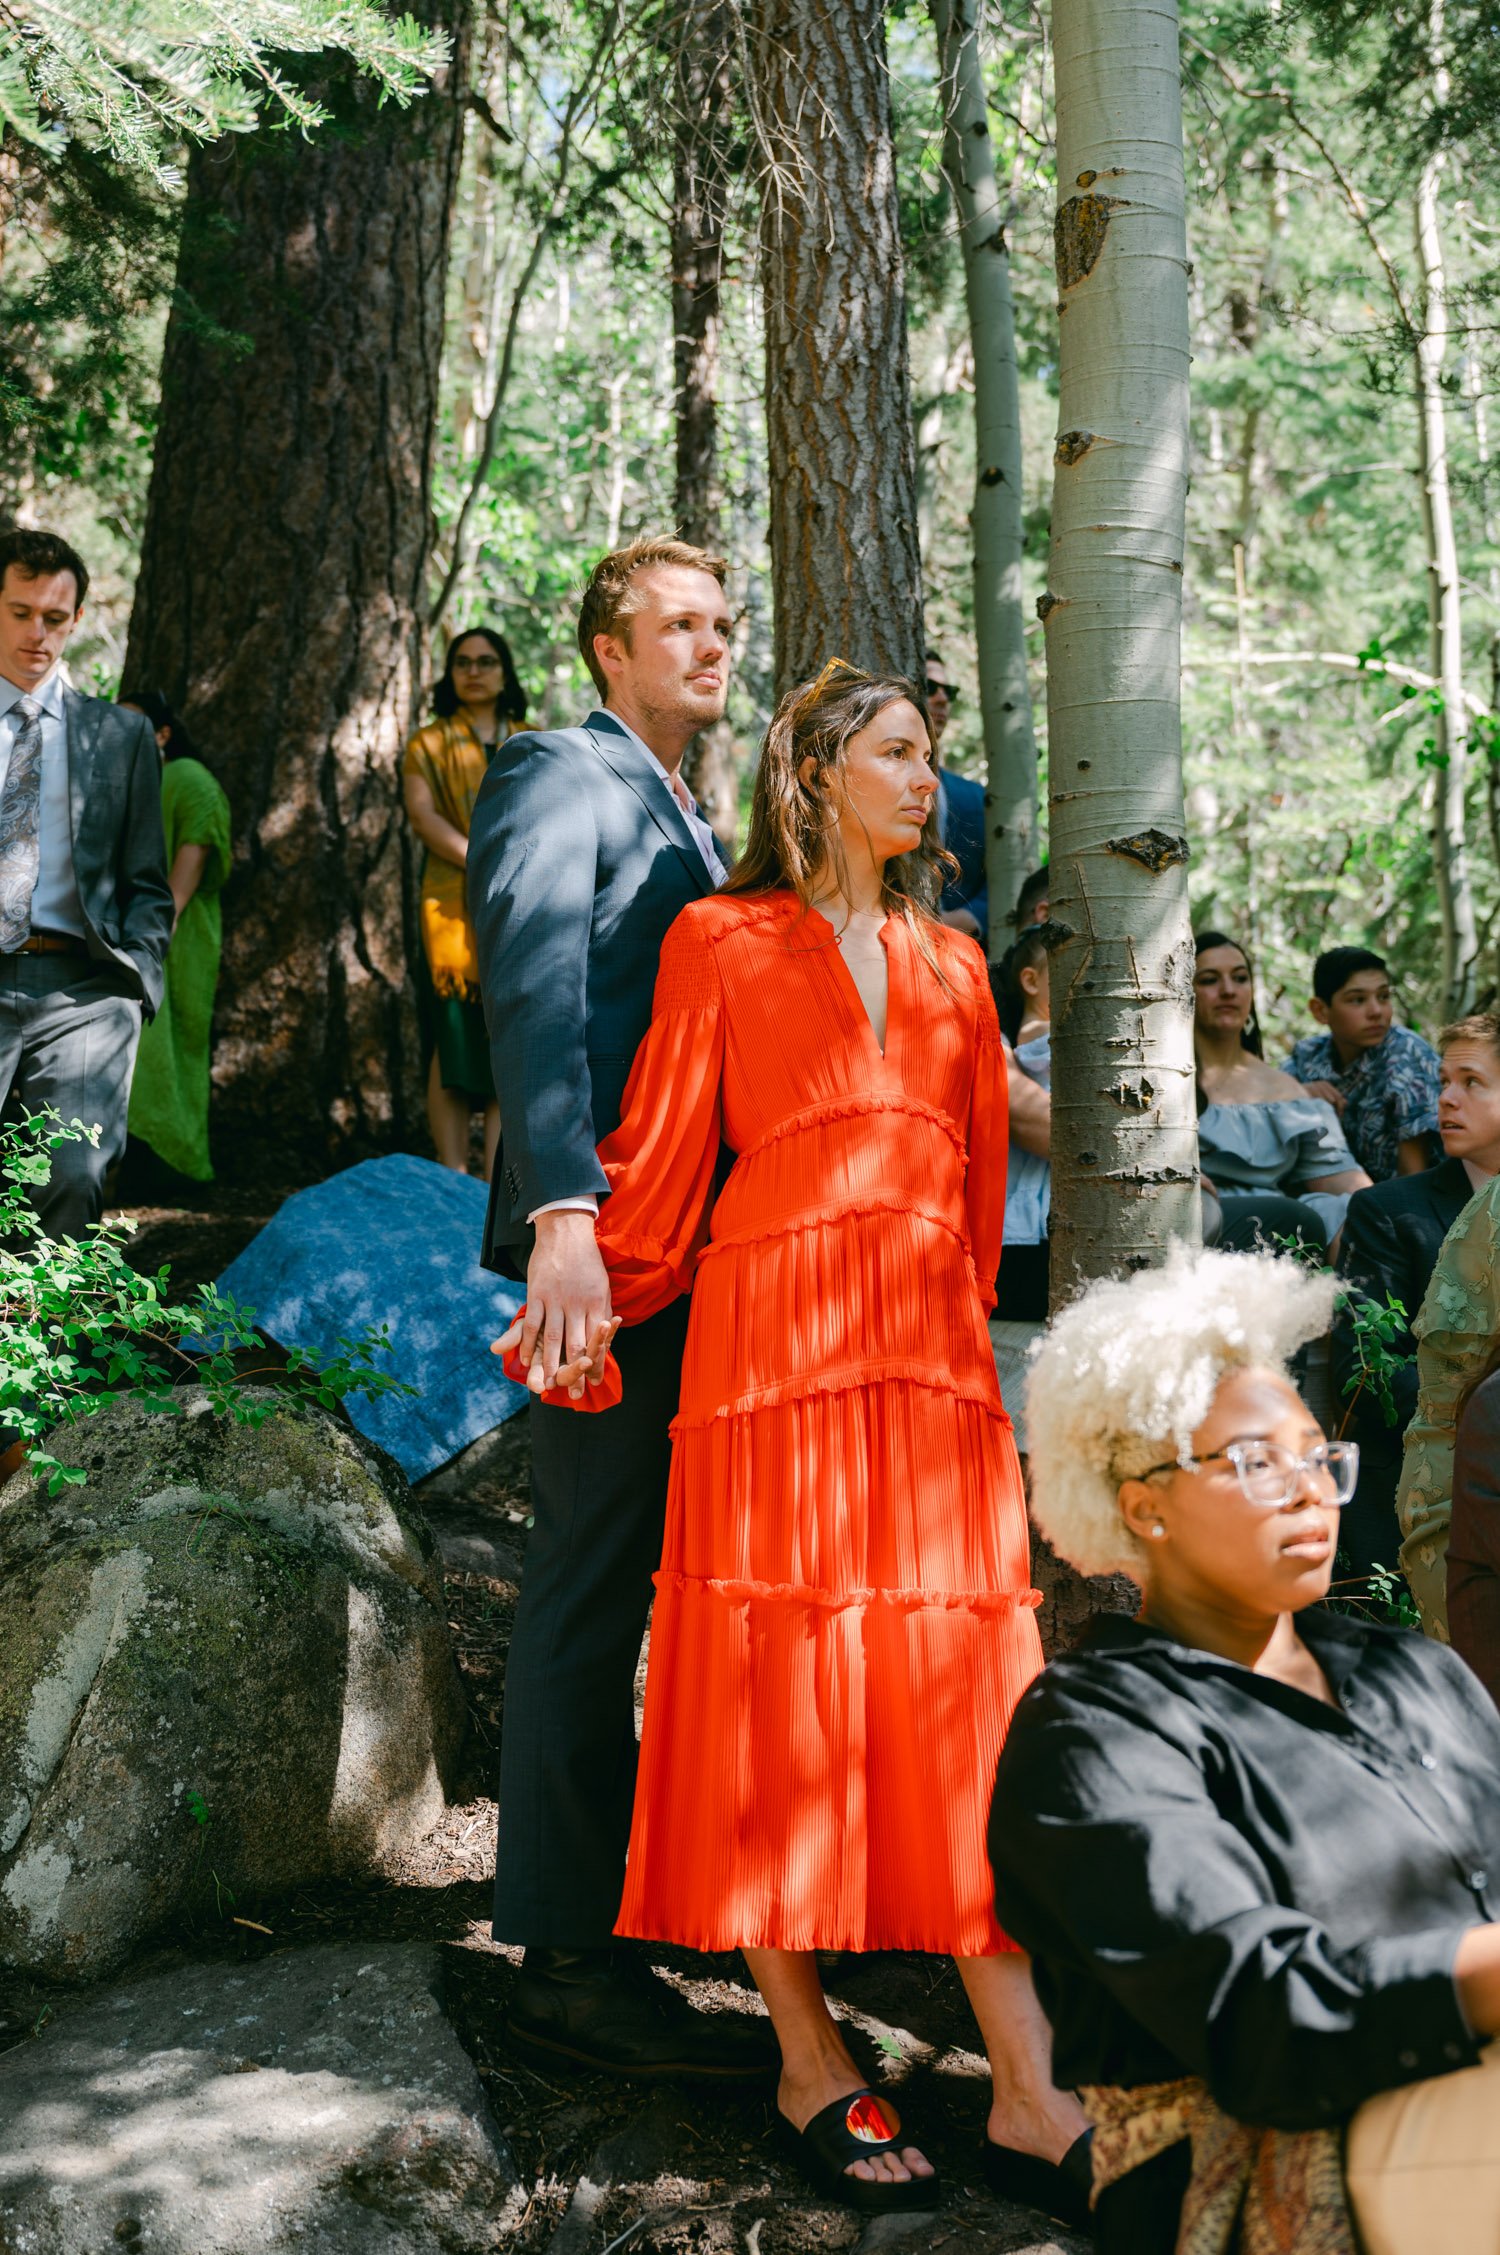 Desolation wilderness hotel wedding, photo of guests holding hands during the ceremony